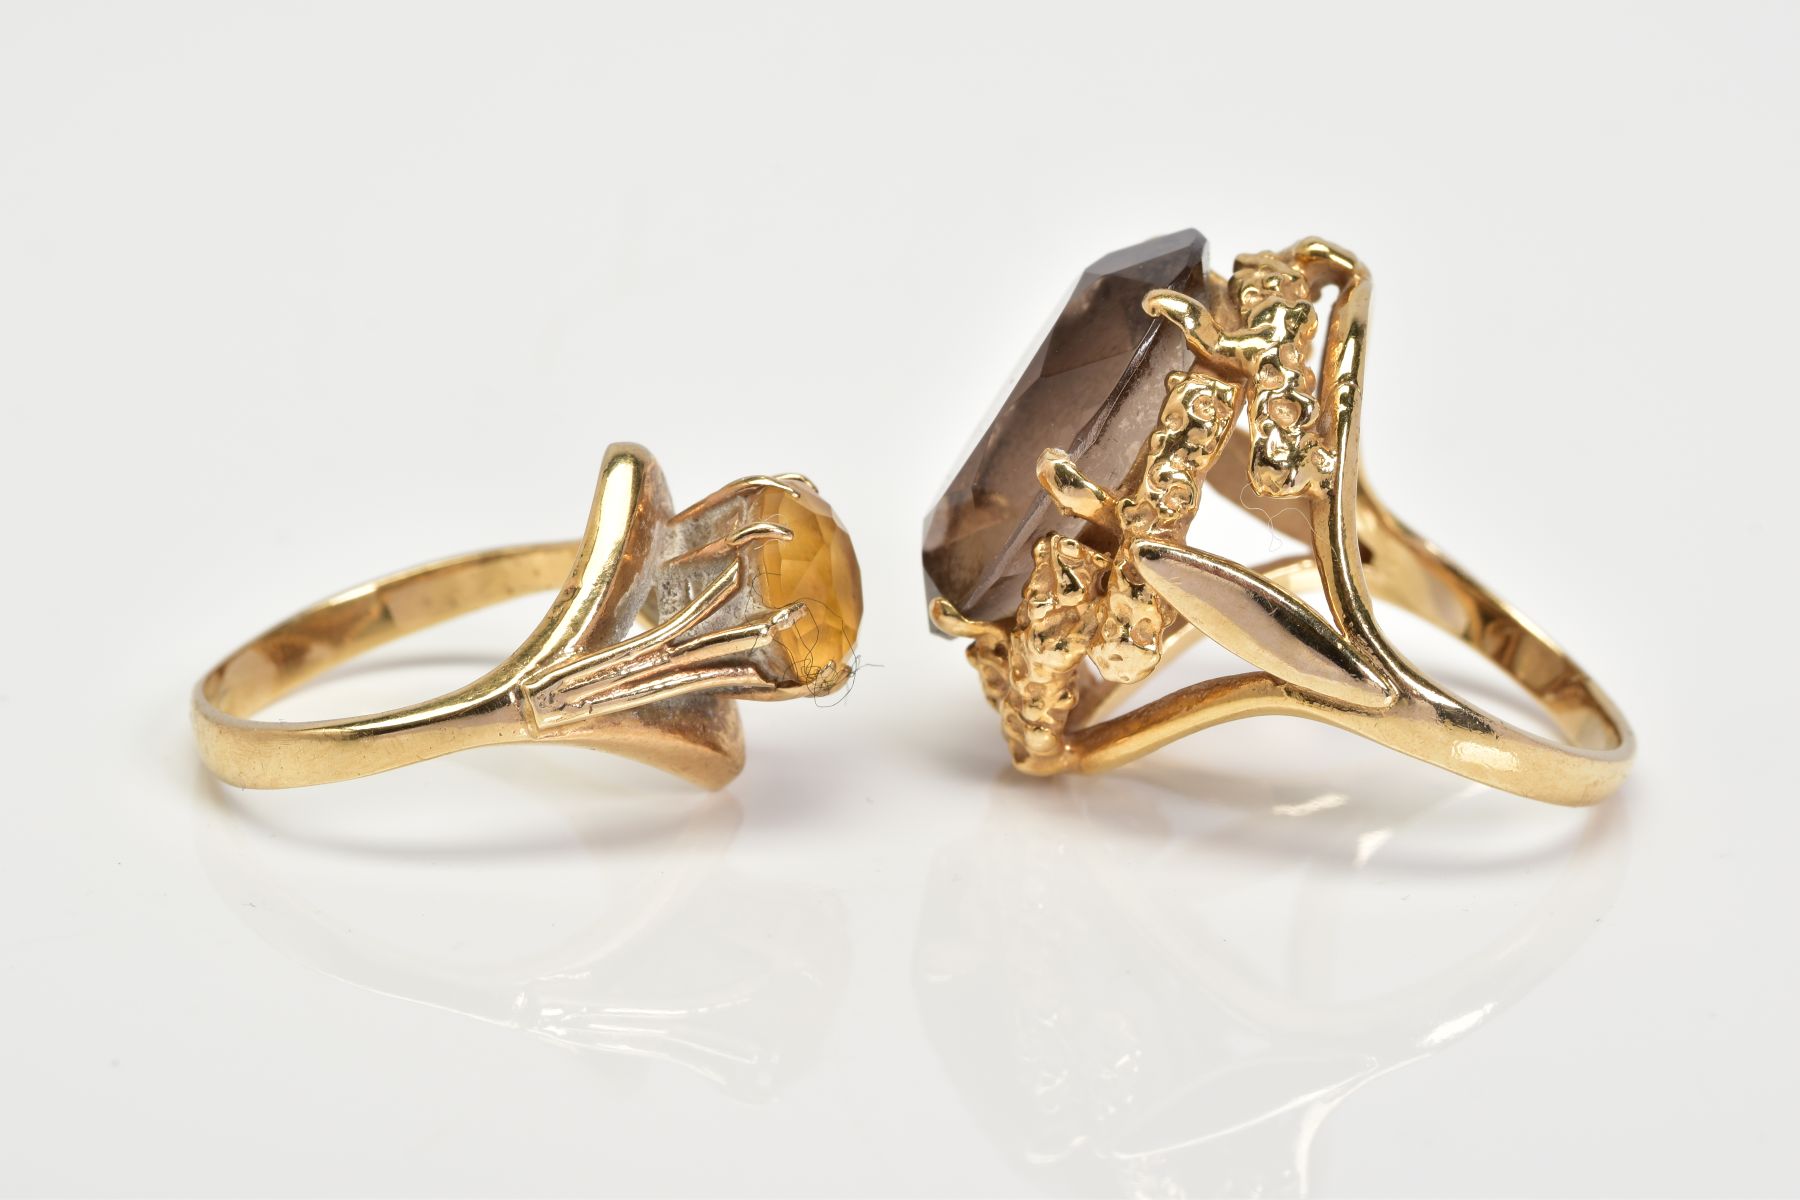 TWO 9CT GOLD GEM SET RINGS, the first ring designed with a claw set oval cut smokey quartz, within a - Image 2 of 3